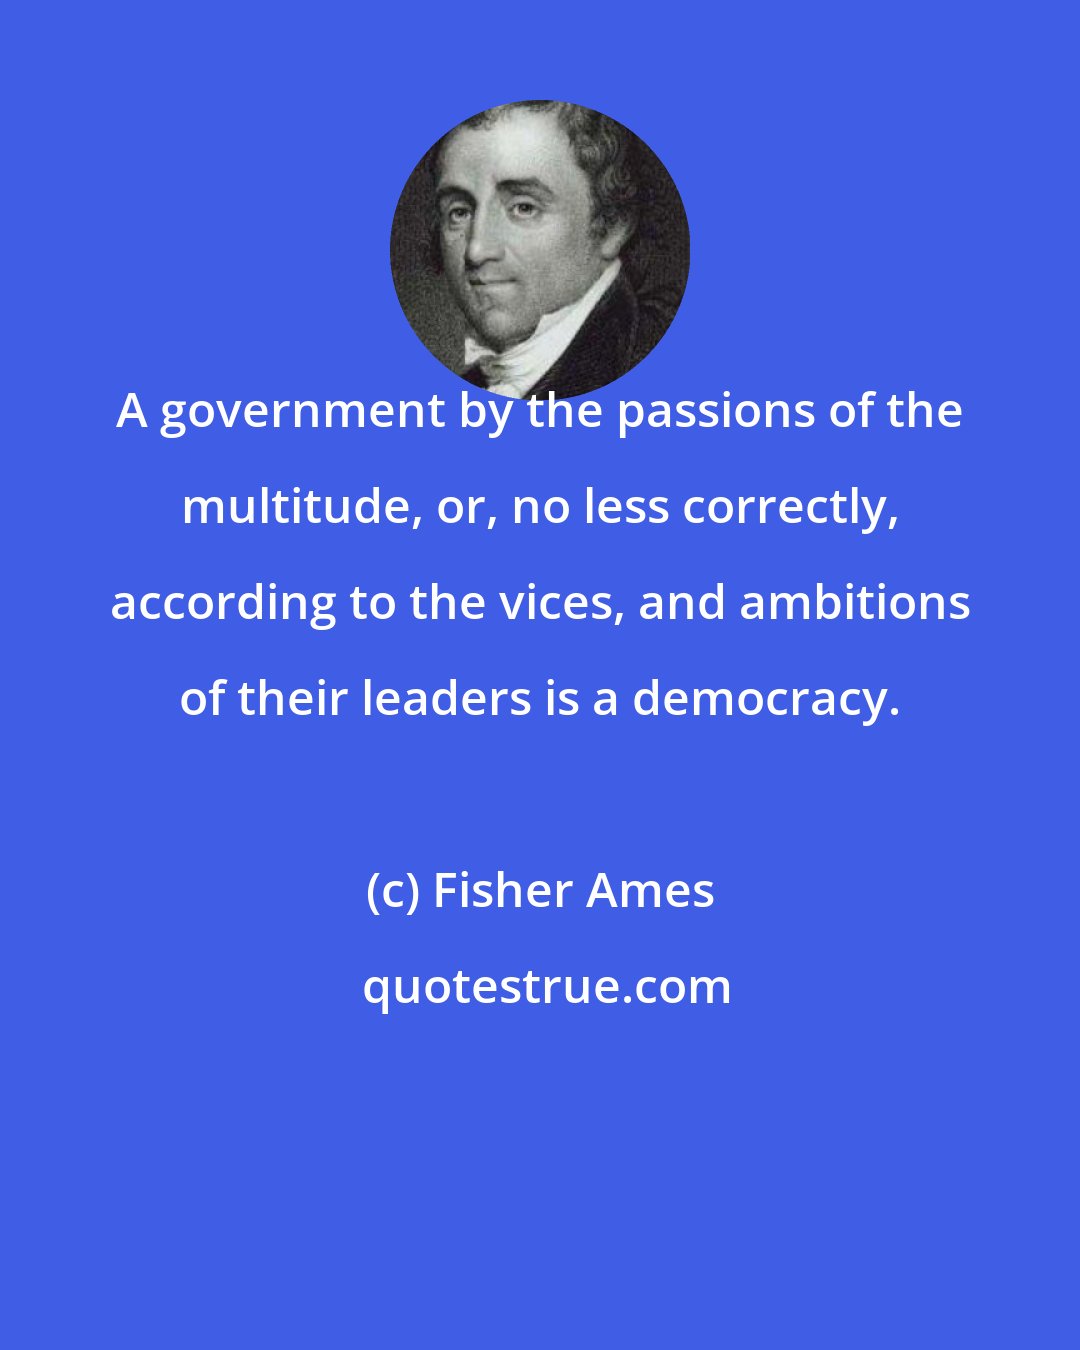 Fisher Ames: A government by the passions of the multitude, or, no less correctly, according to the vices, and ambitions of their leaders is a democracy.